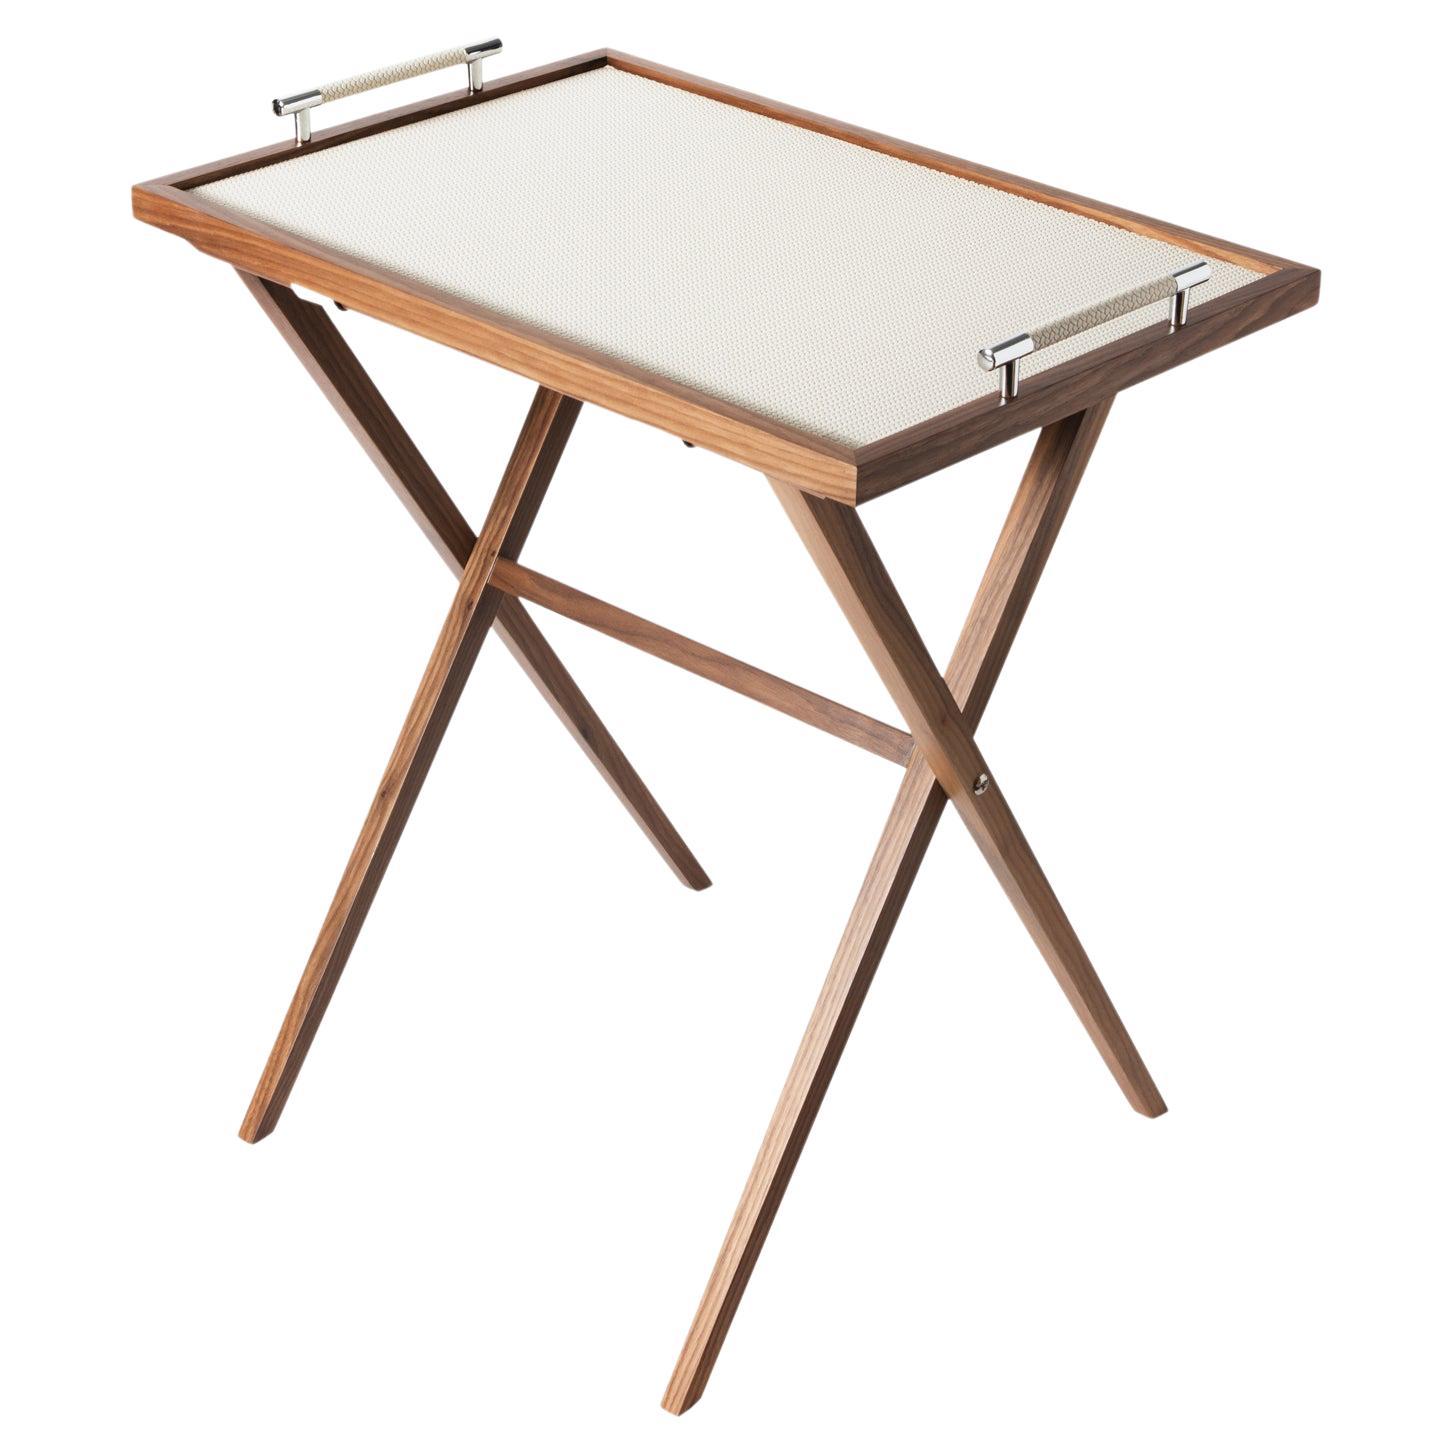 21st Century Leather & Walnut Wood Dedalo Folding Table Handcrafed in Italy For Sale